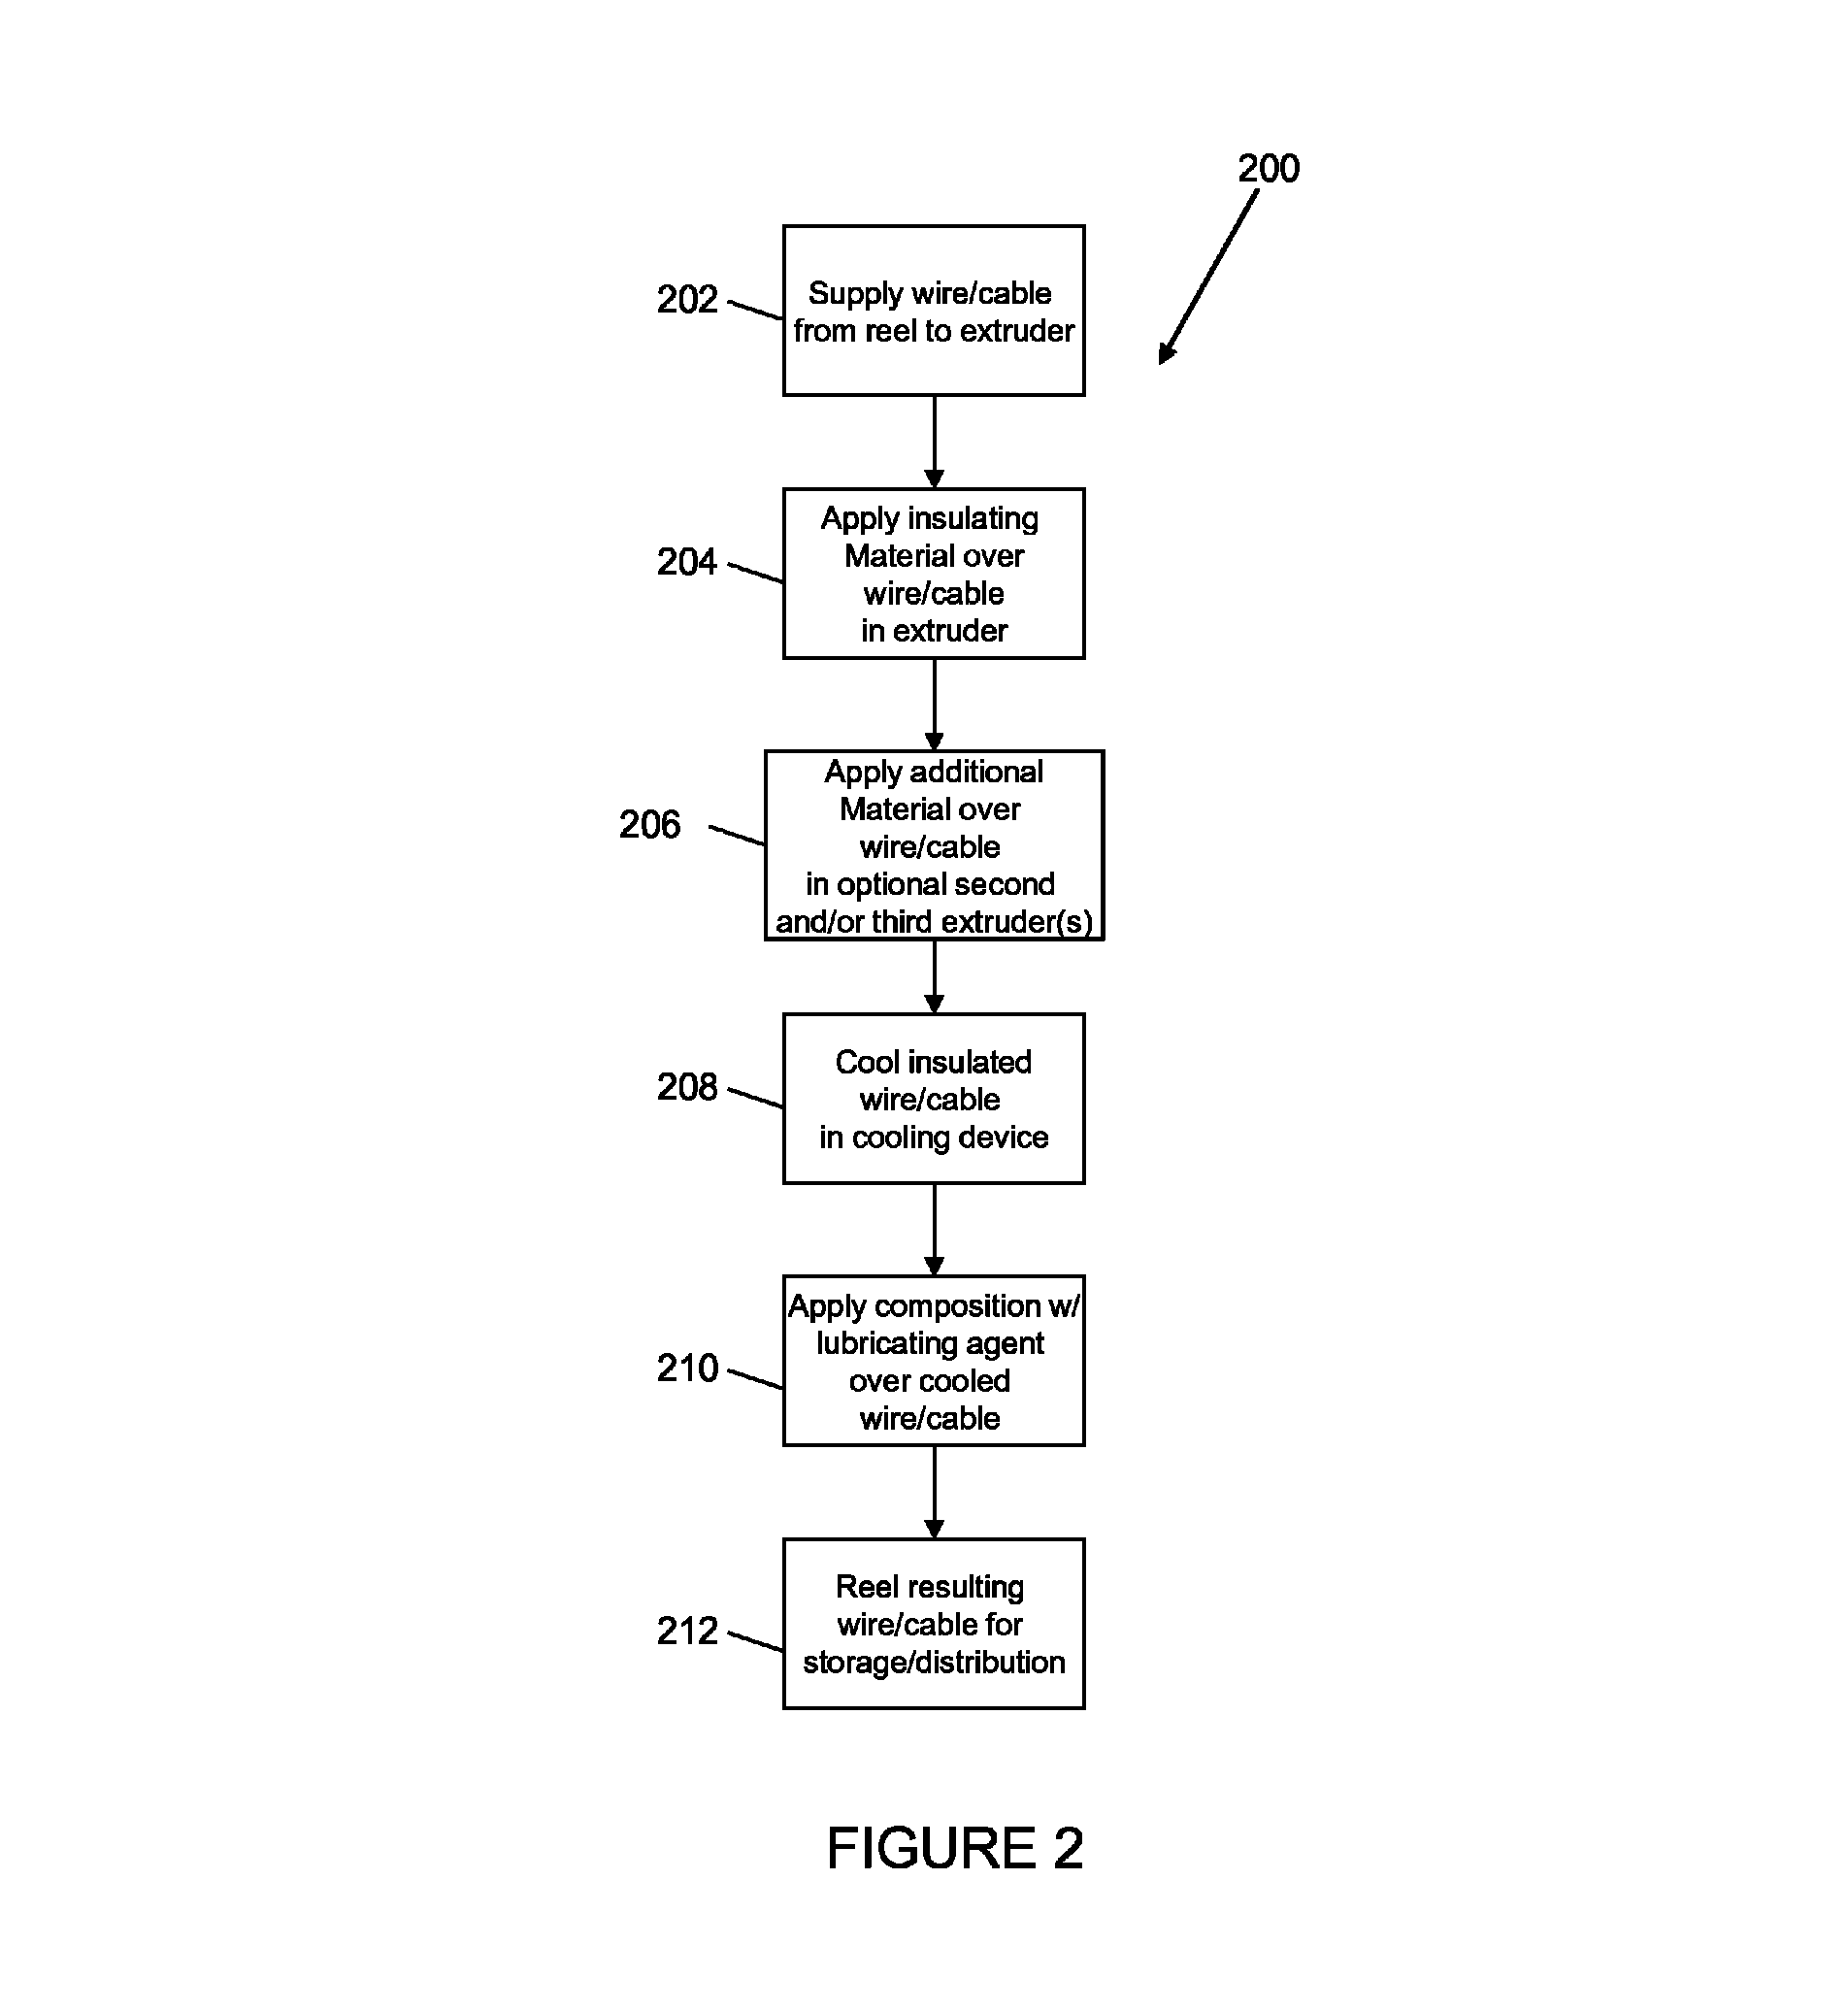 System, composition and method of application of same for reducing the coefficient of friction and required pulling force during installation of wire or cable